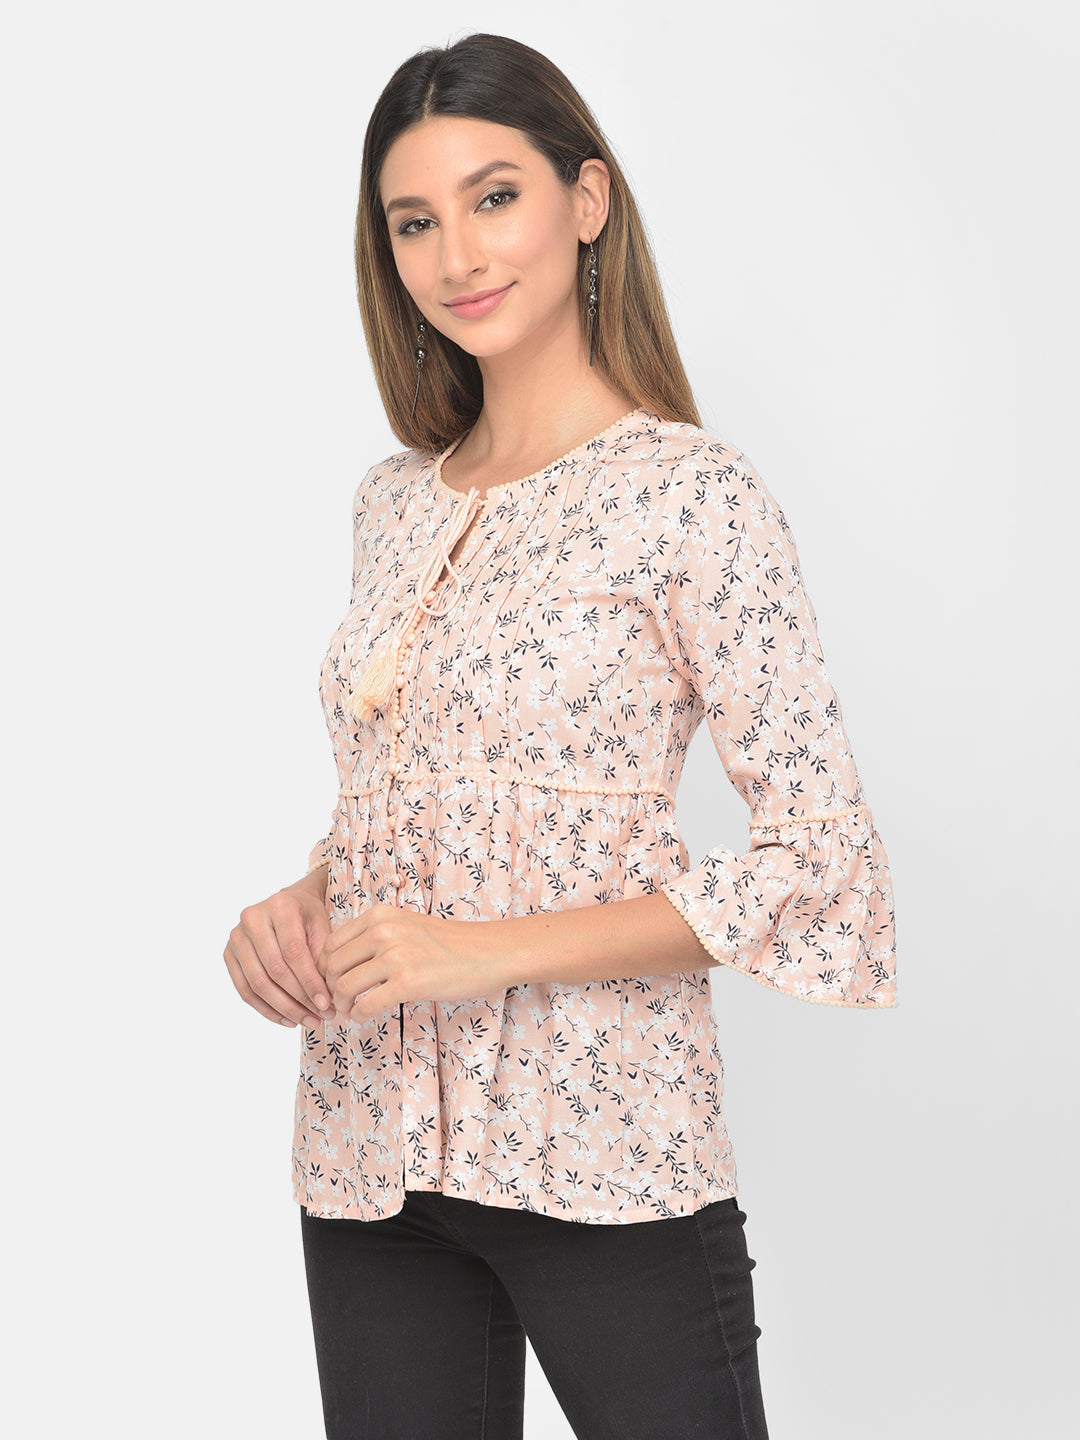 Peach 3/4 Sleeve With Printed Blouse